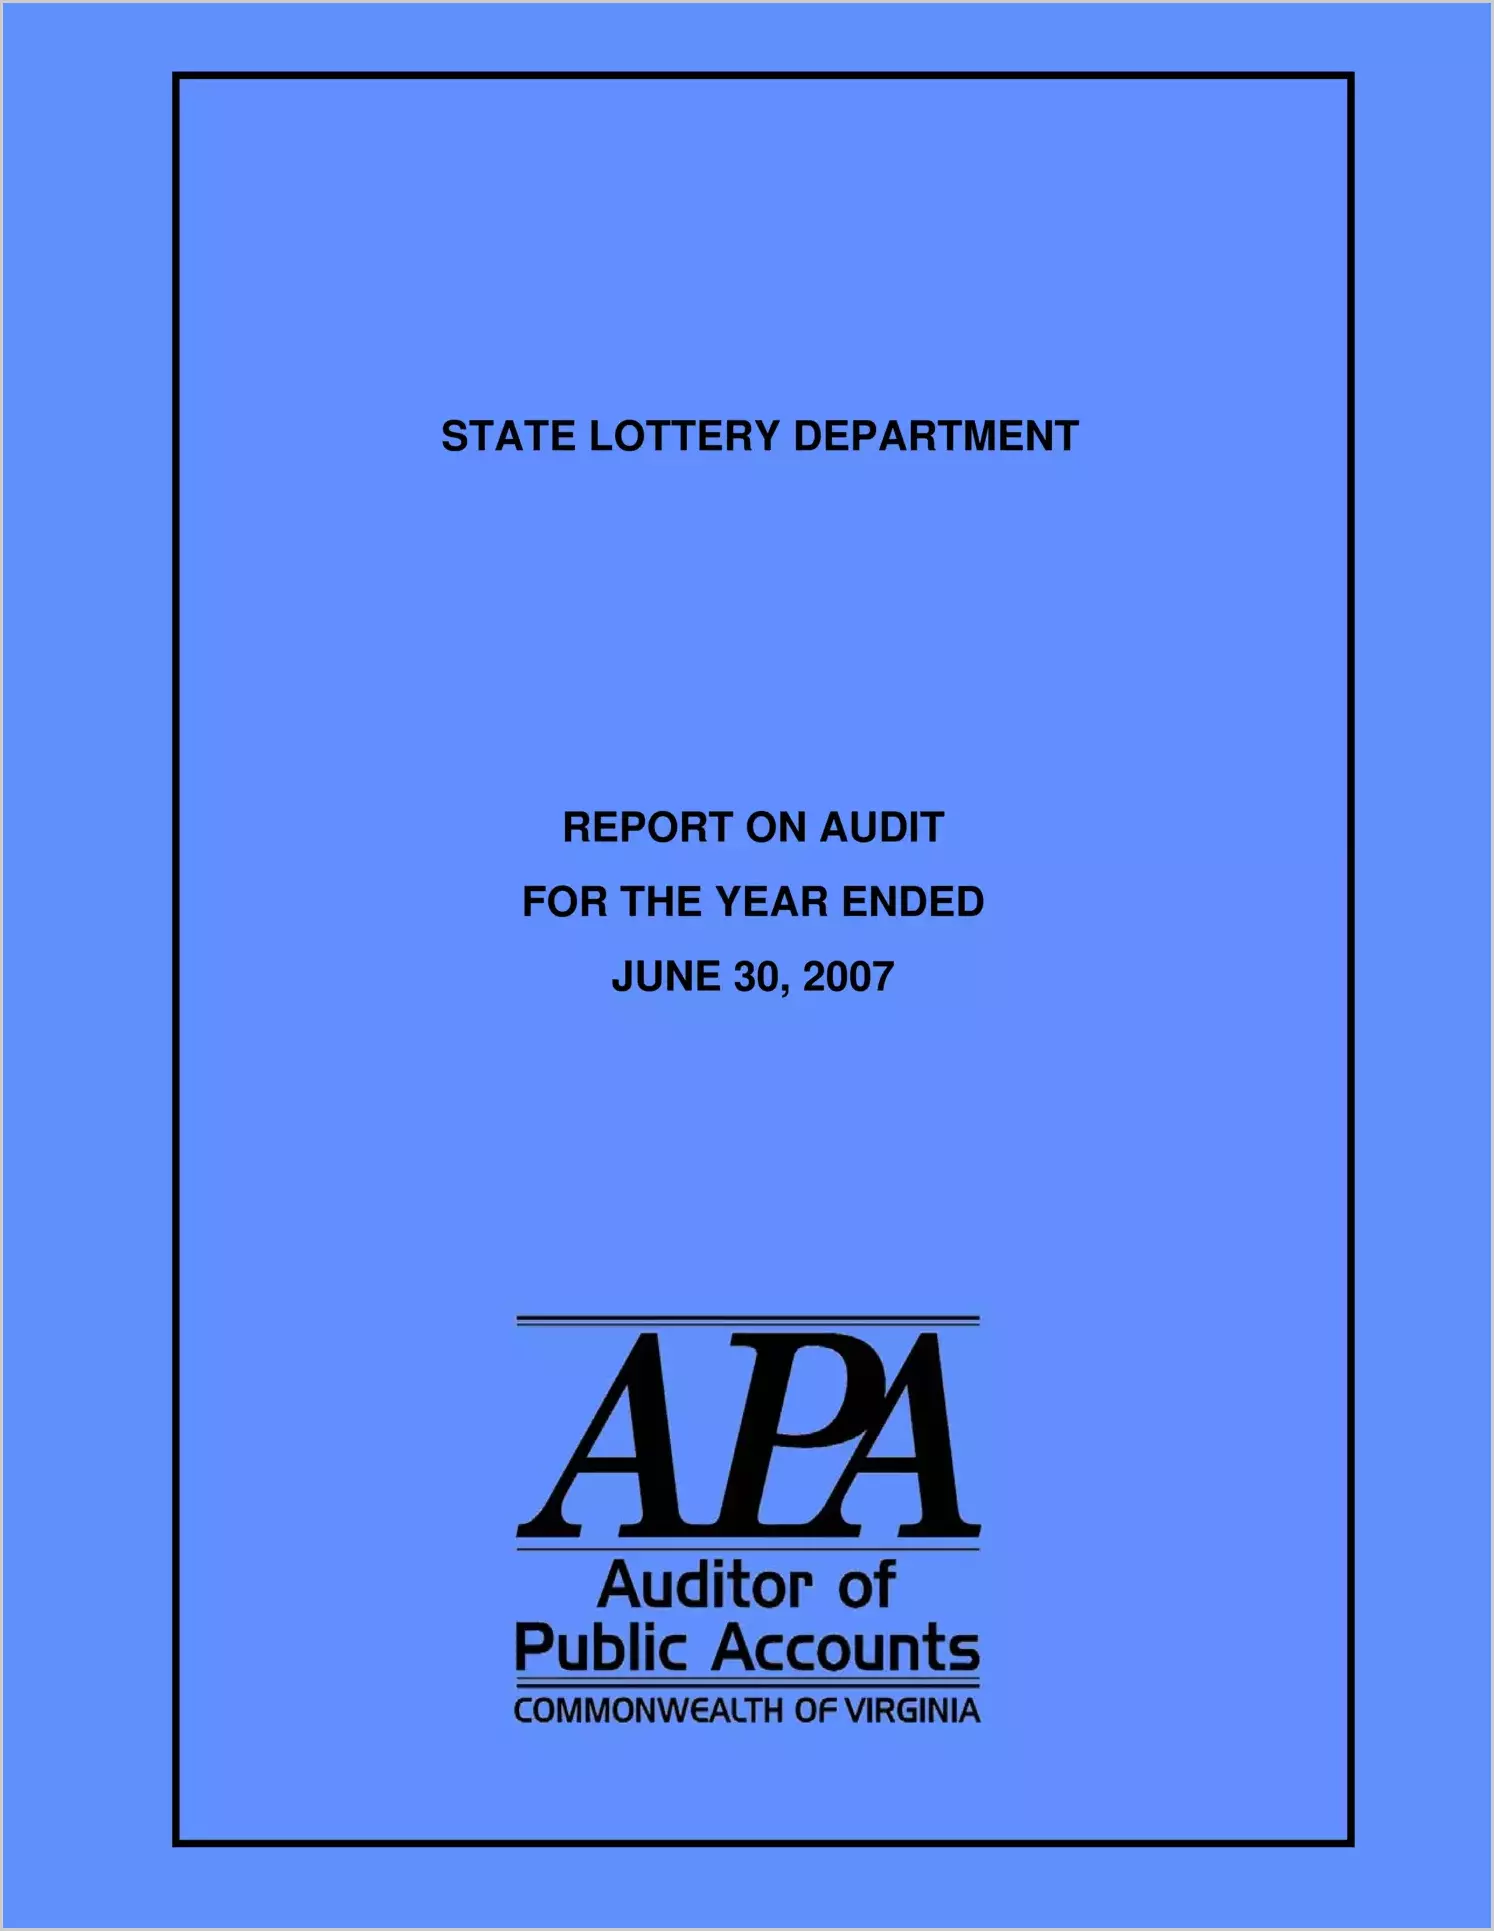 State Lottery Department for the year ended June 30, 2007